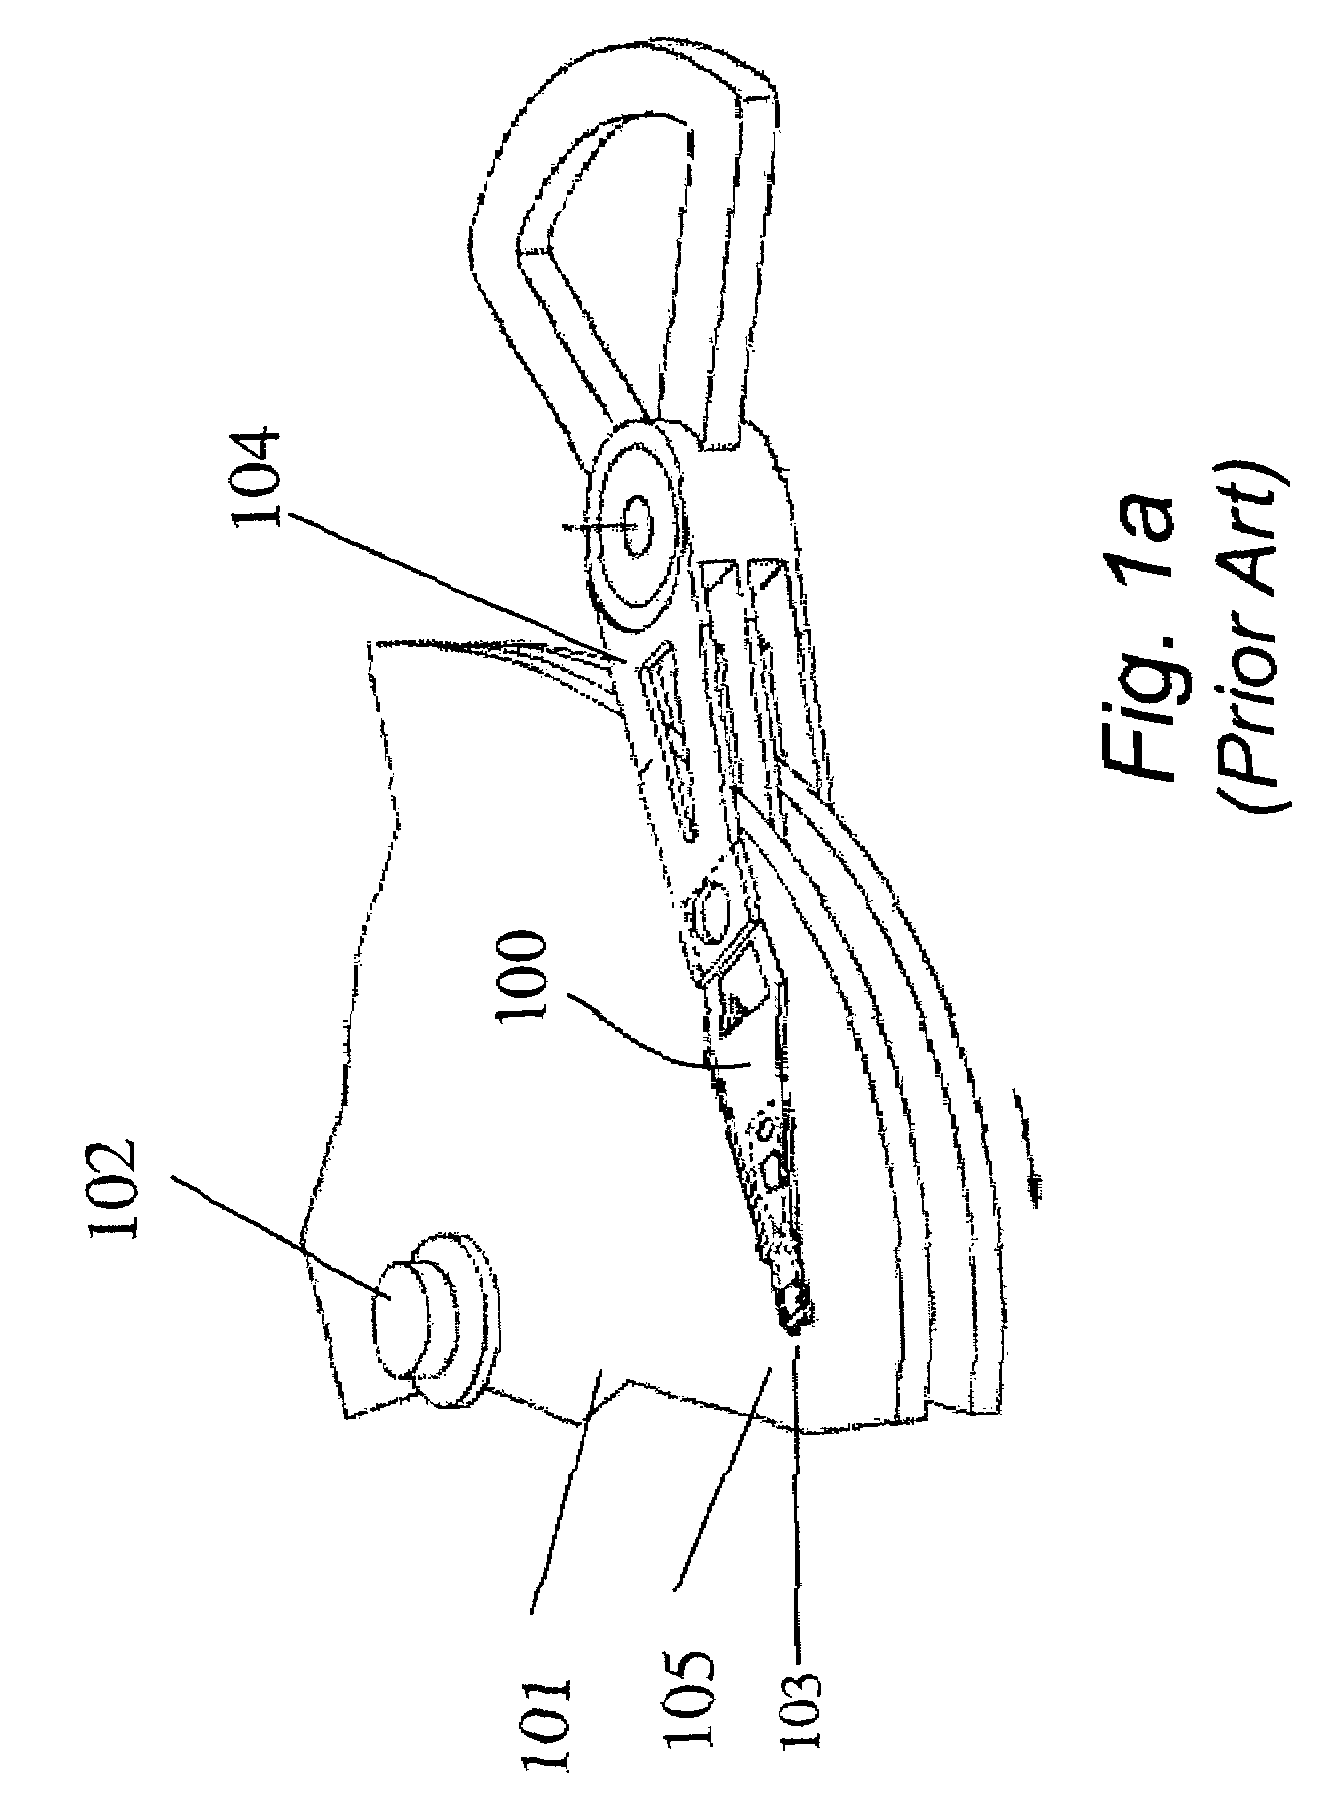 Rotational PZT micro-actuator, head gimbal assembly, and disk drive unit with the same